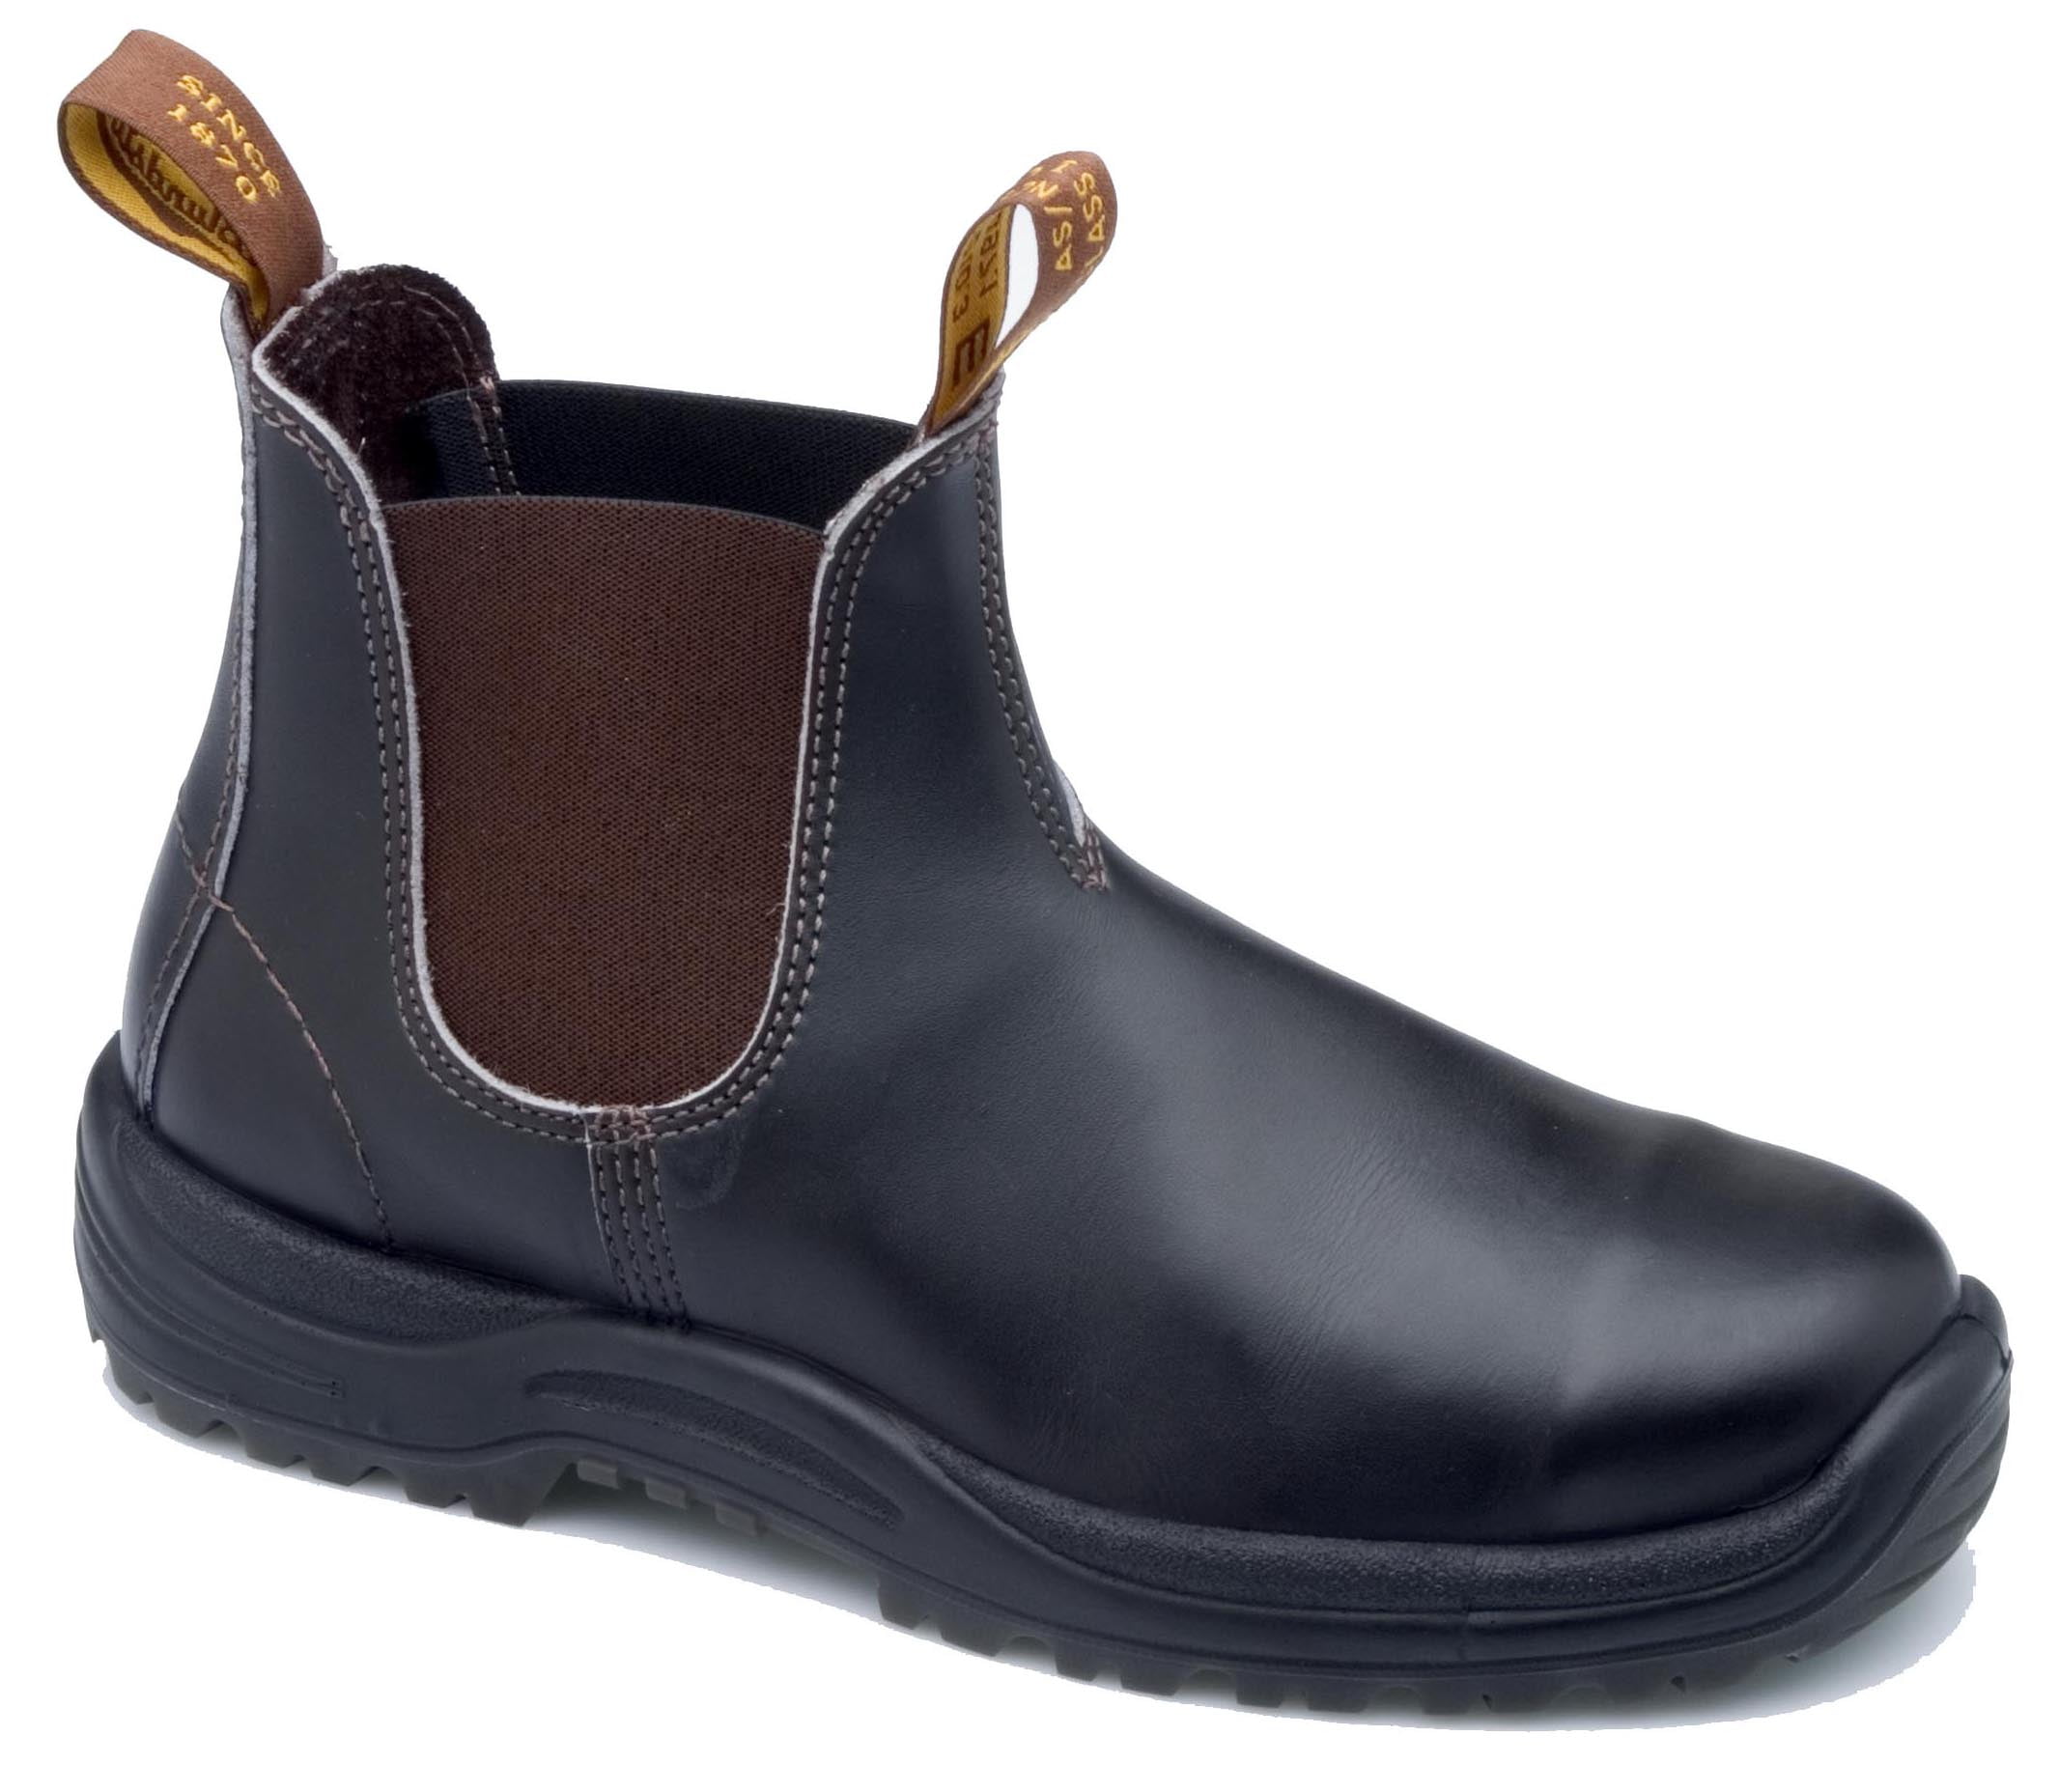 Blundstone 311 Leather Elastic Side Steel Toe Work Safety Boots---Special 